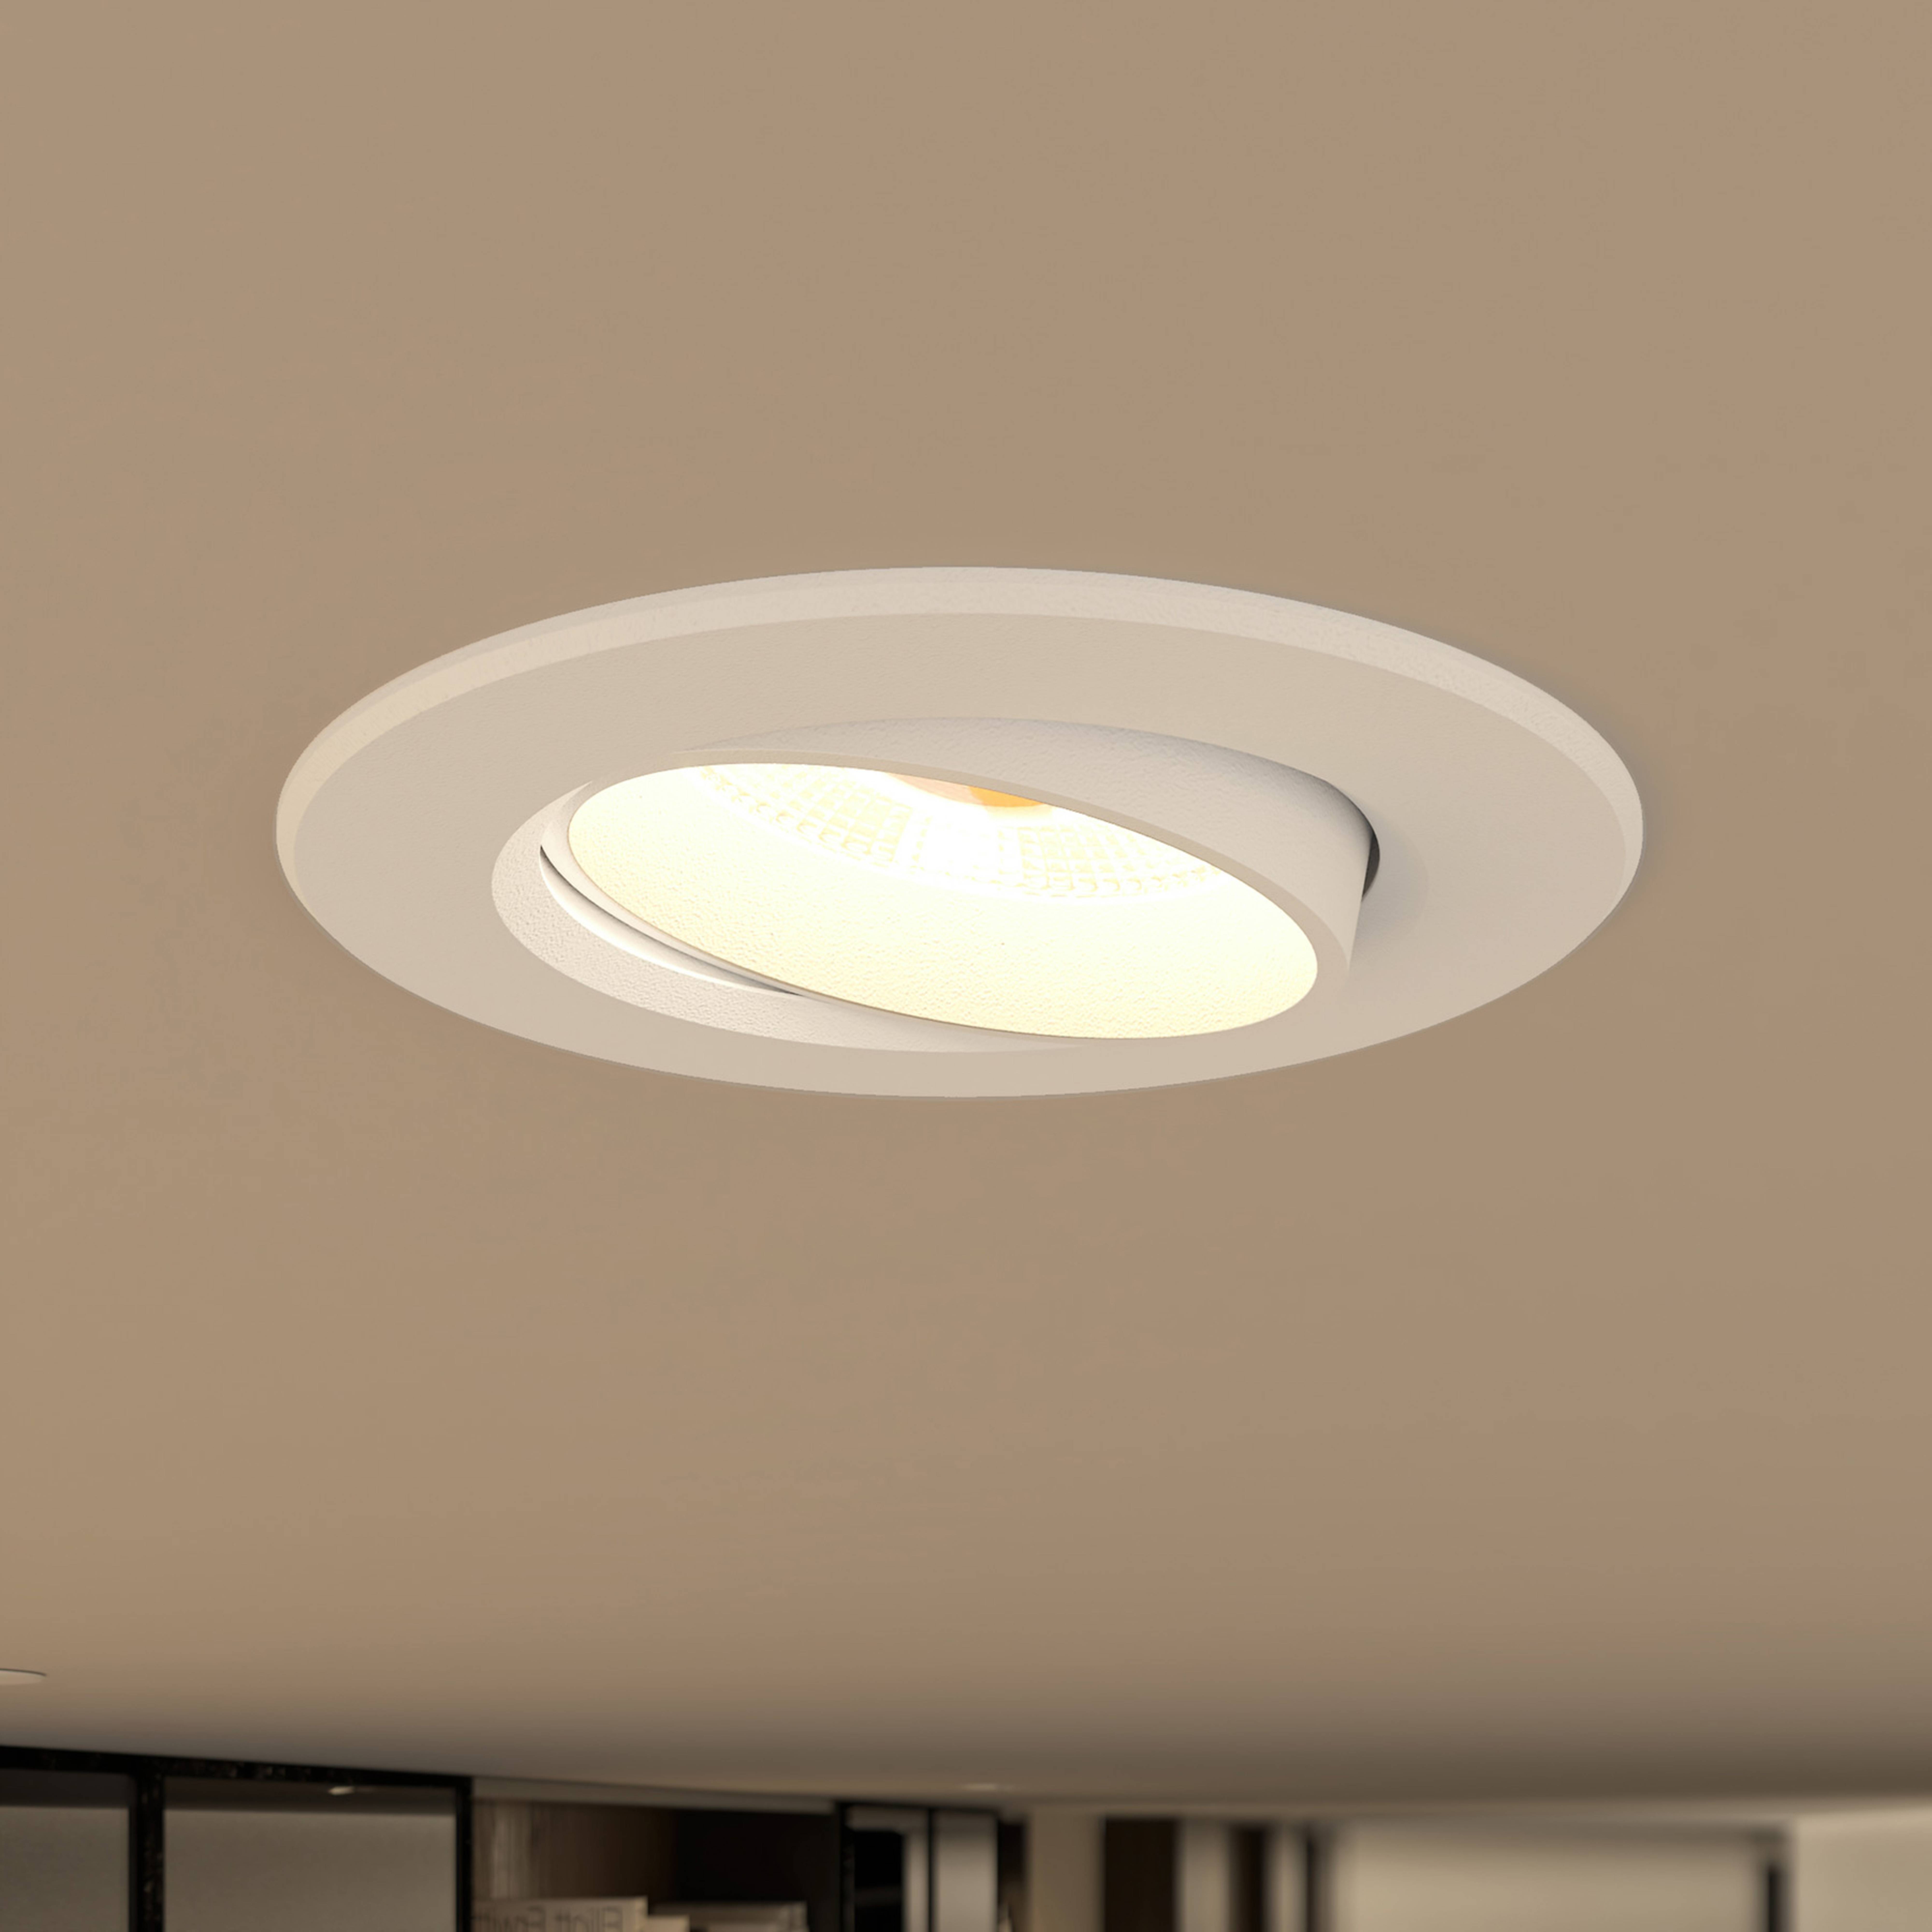 Prios LED recessed light Shima, white, 7 W, 3000K, dimmable